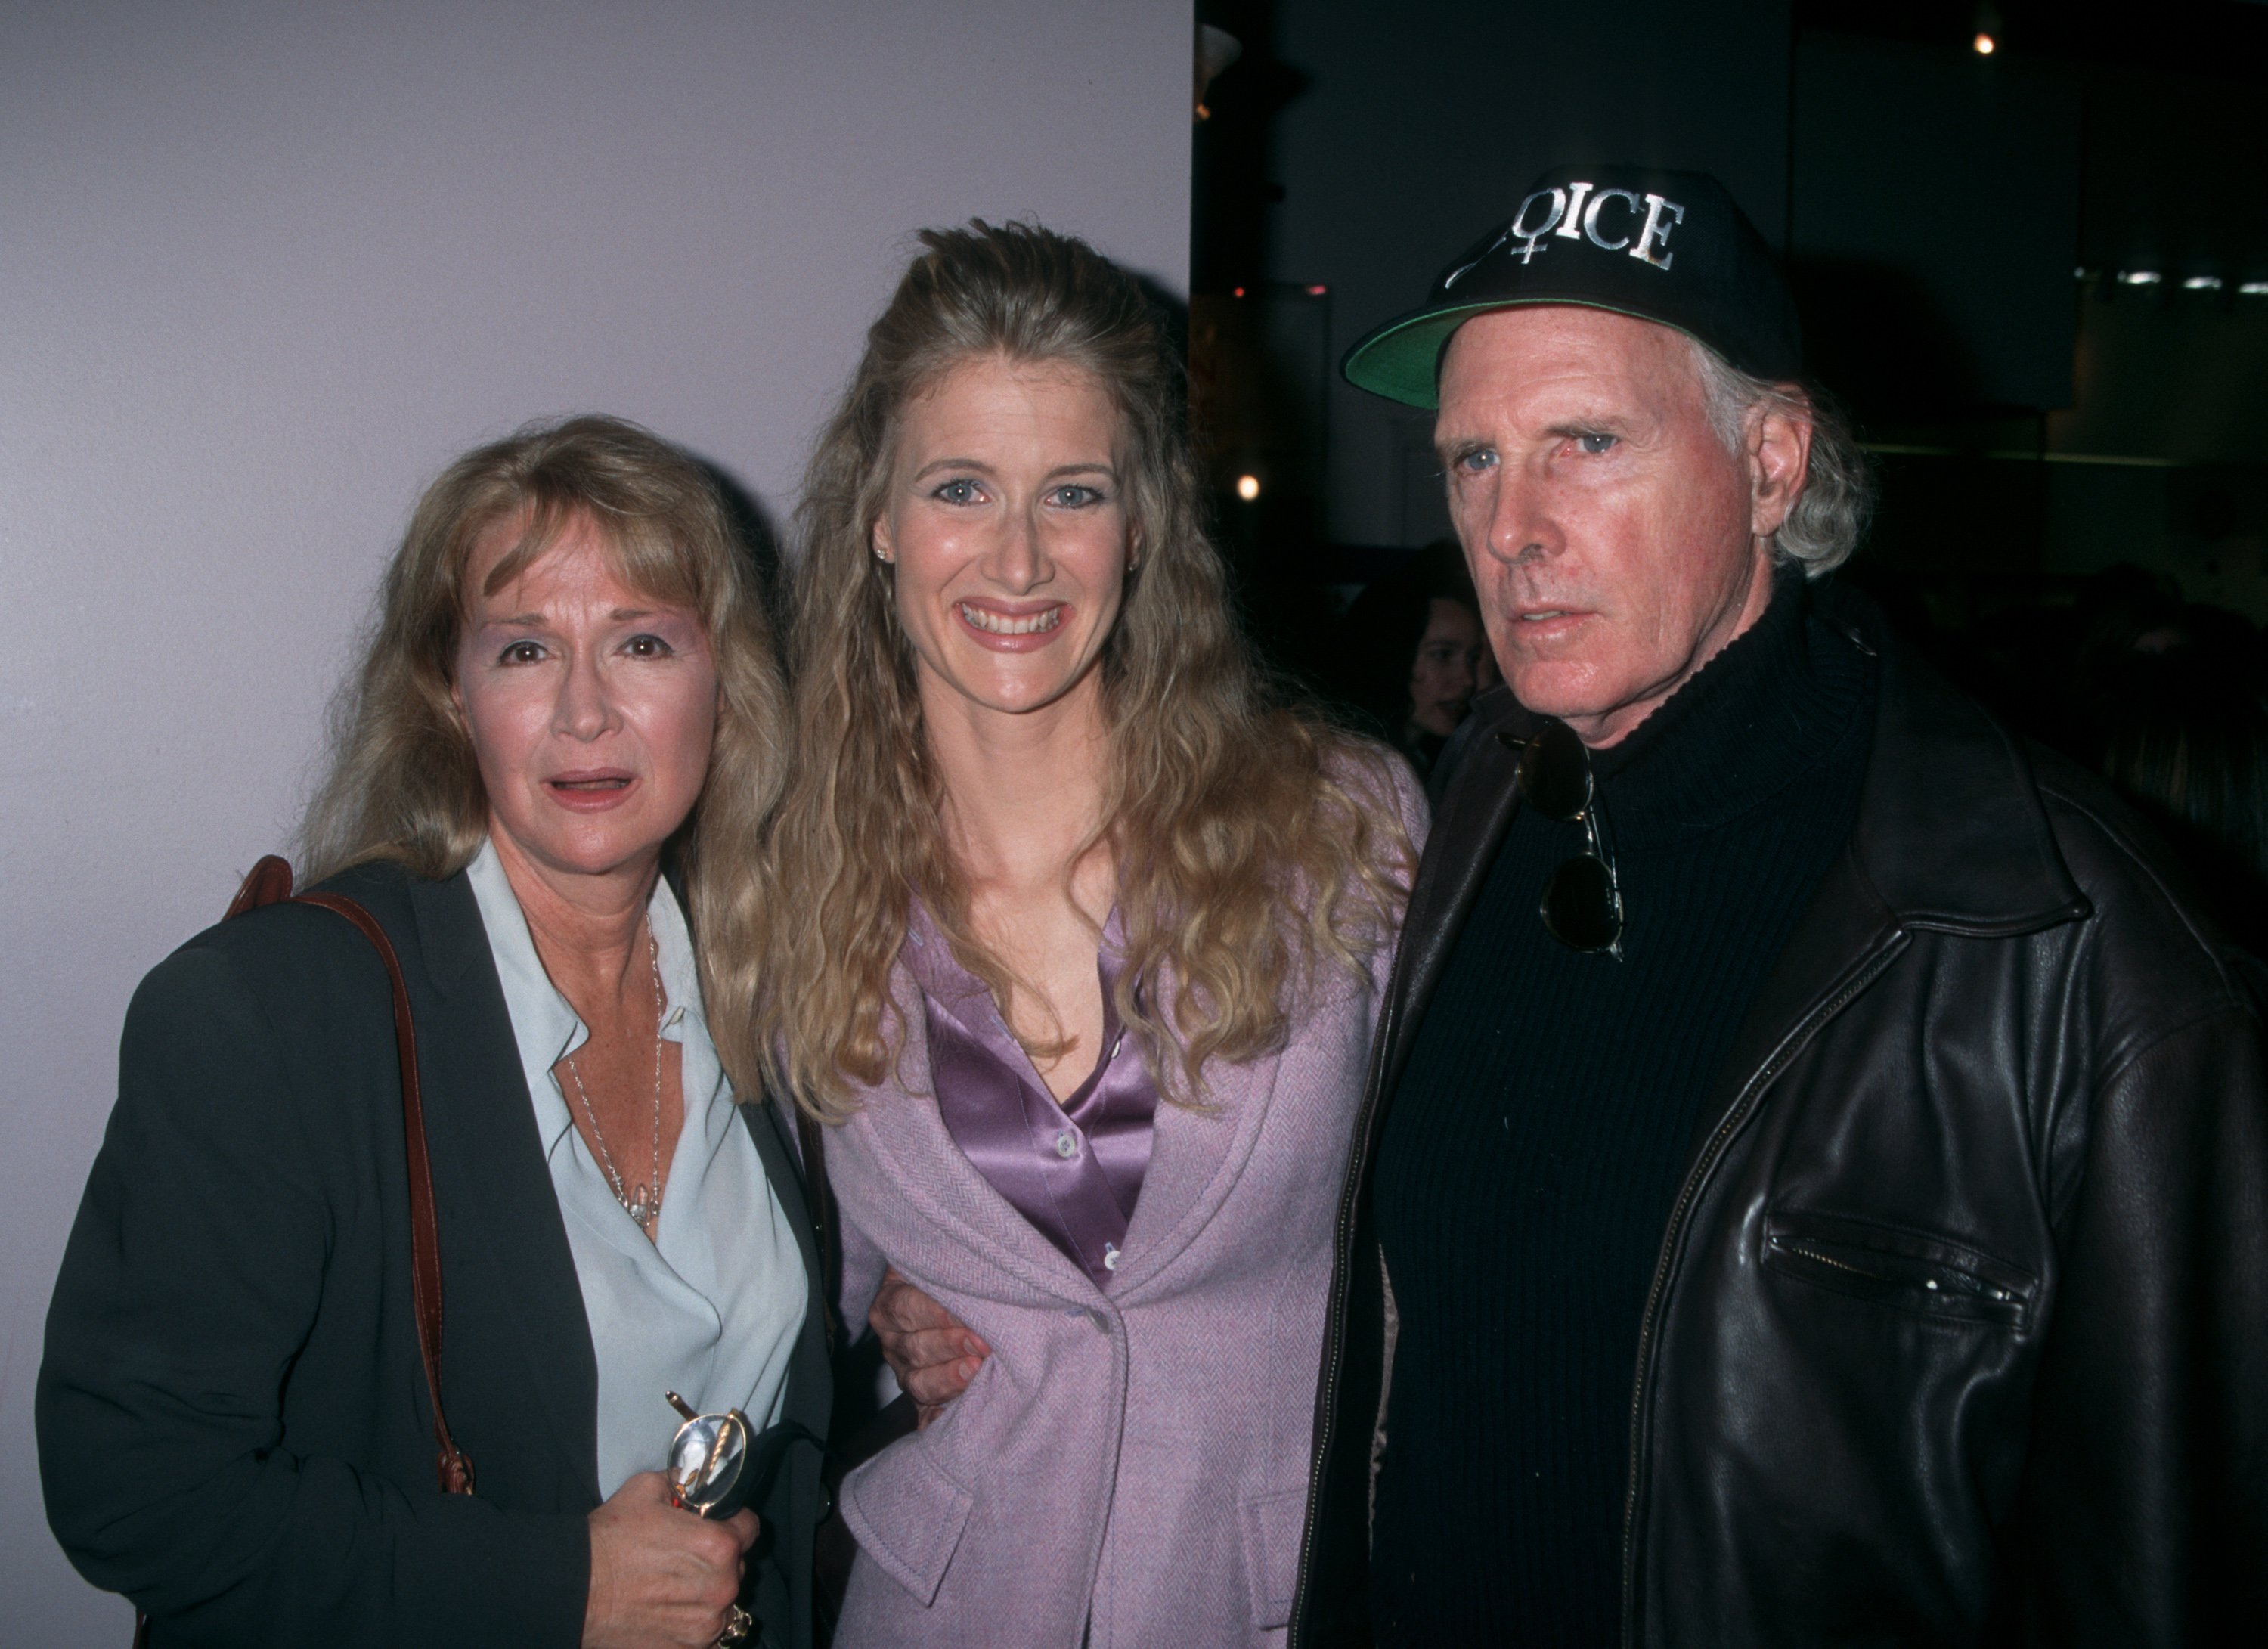 Diane Ladd, Laura Dern and actor Bruce Dern attending the Los Angeles premiere of "Citizen Ruth" on November 21, 1996 at Laemmle Sunset 5 Theater in West Hollywood, California | Source: Getty Images